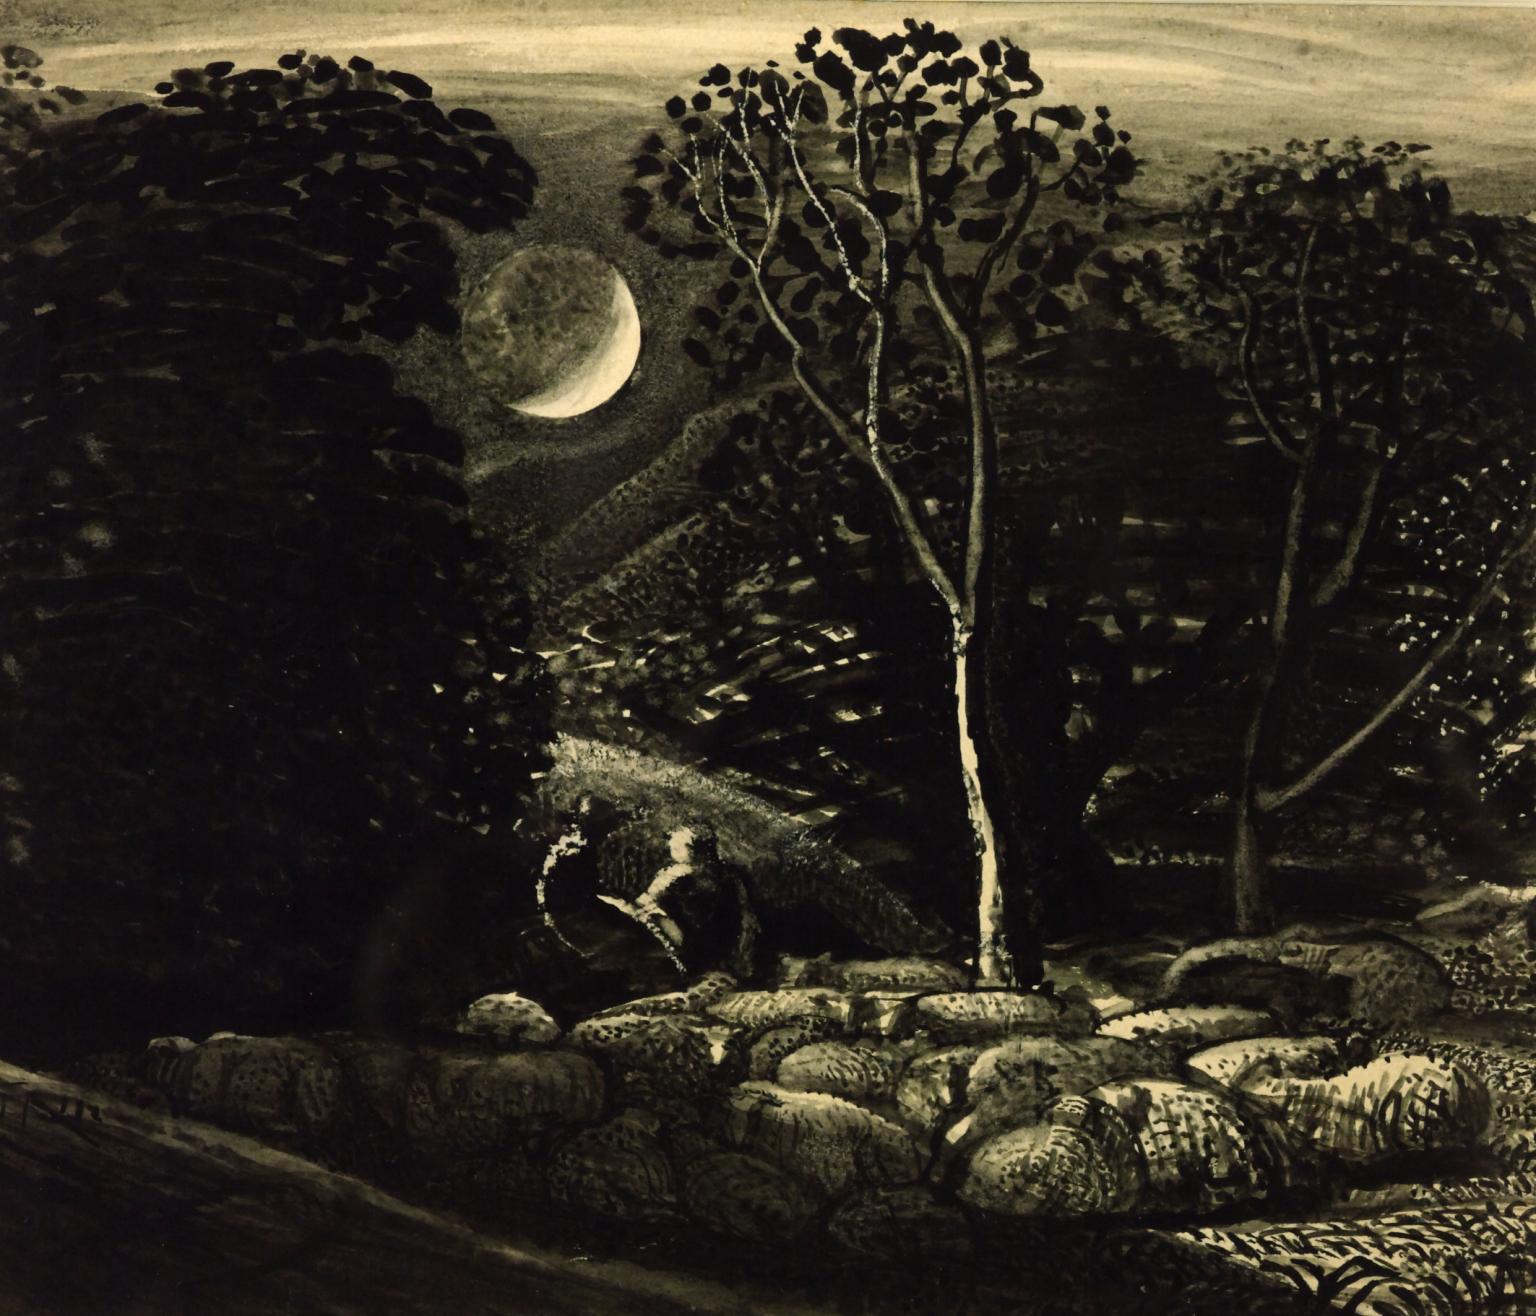 Black and white old painting at night with sheep under a crescent moon